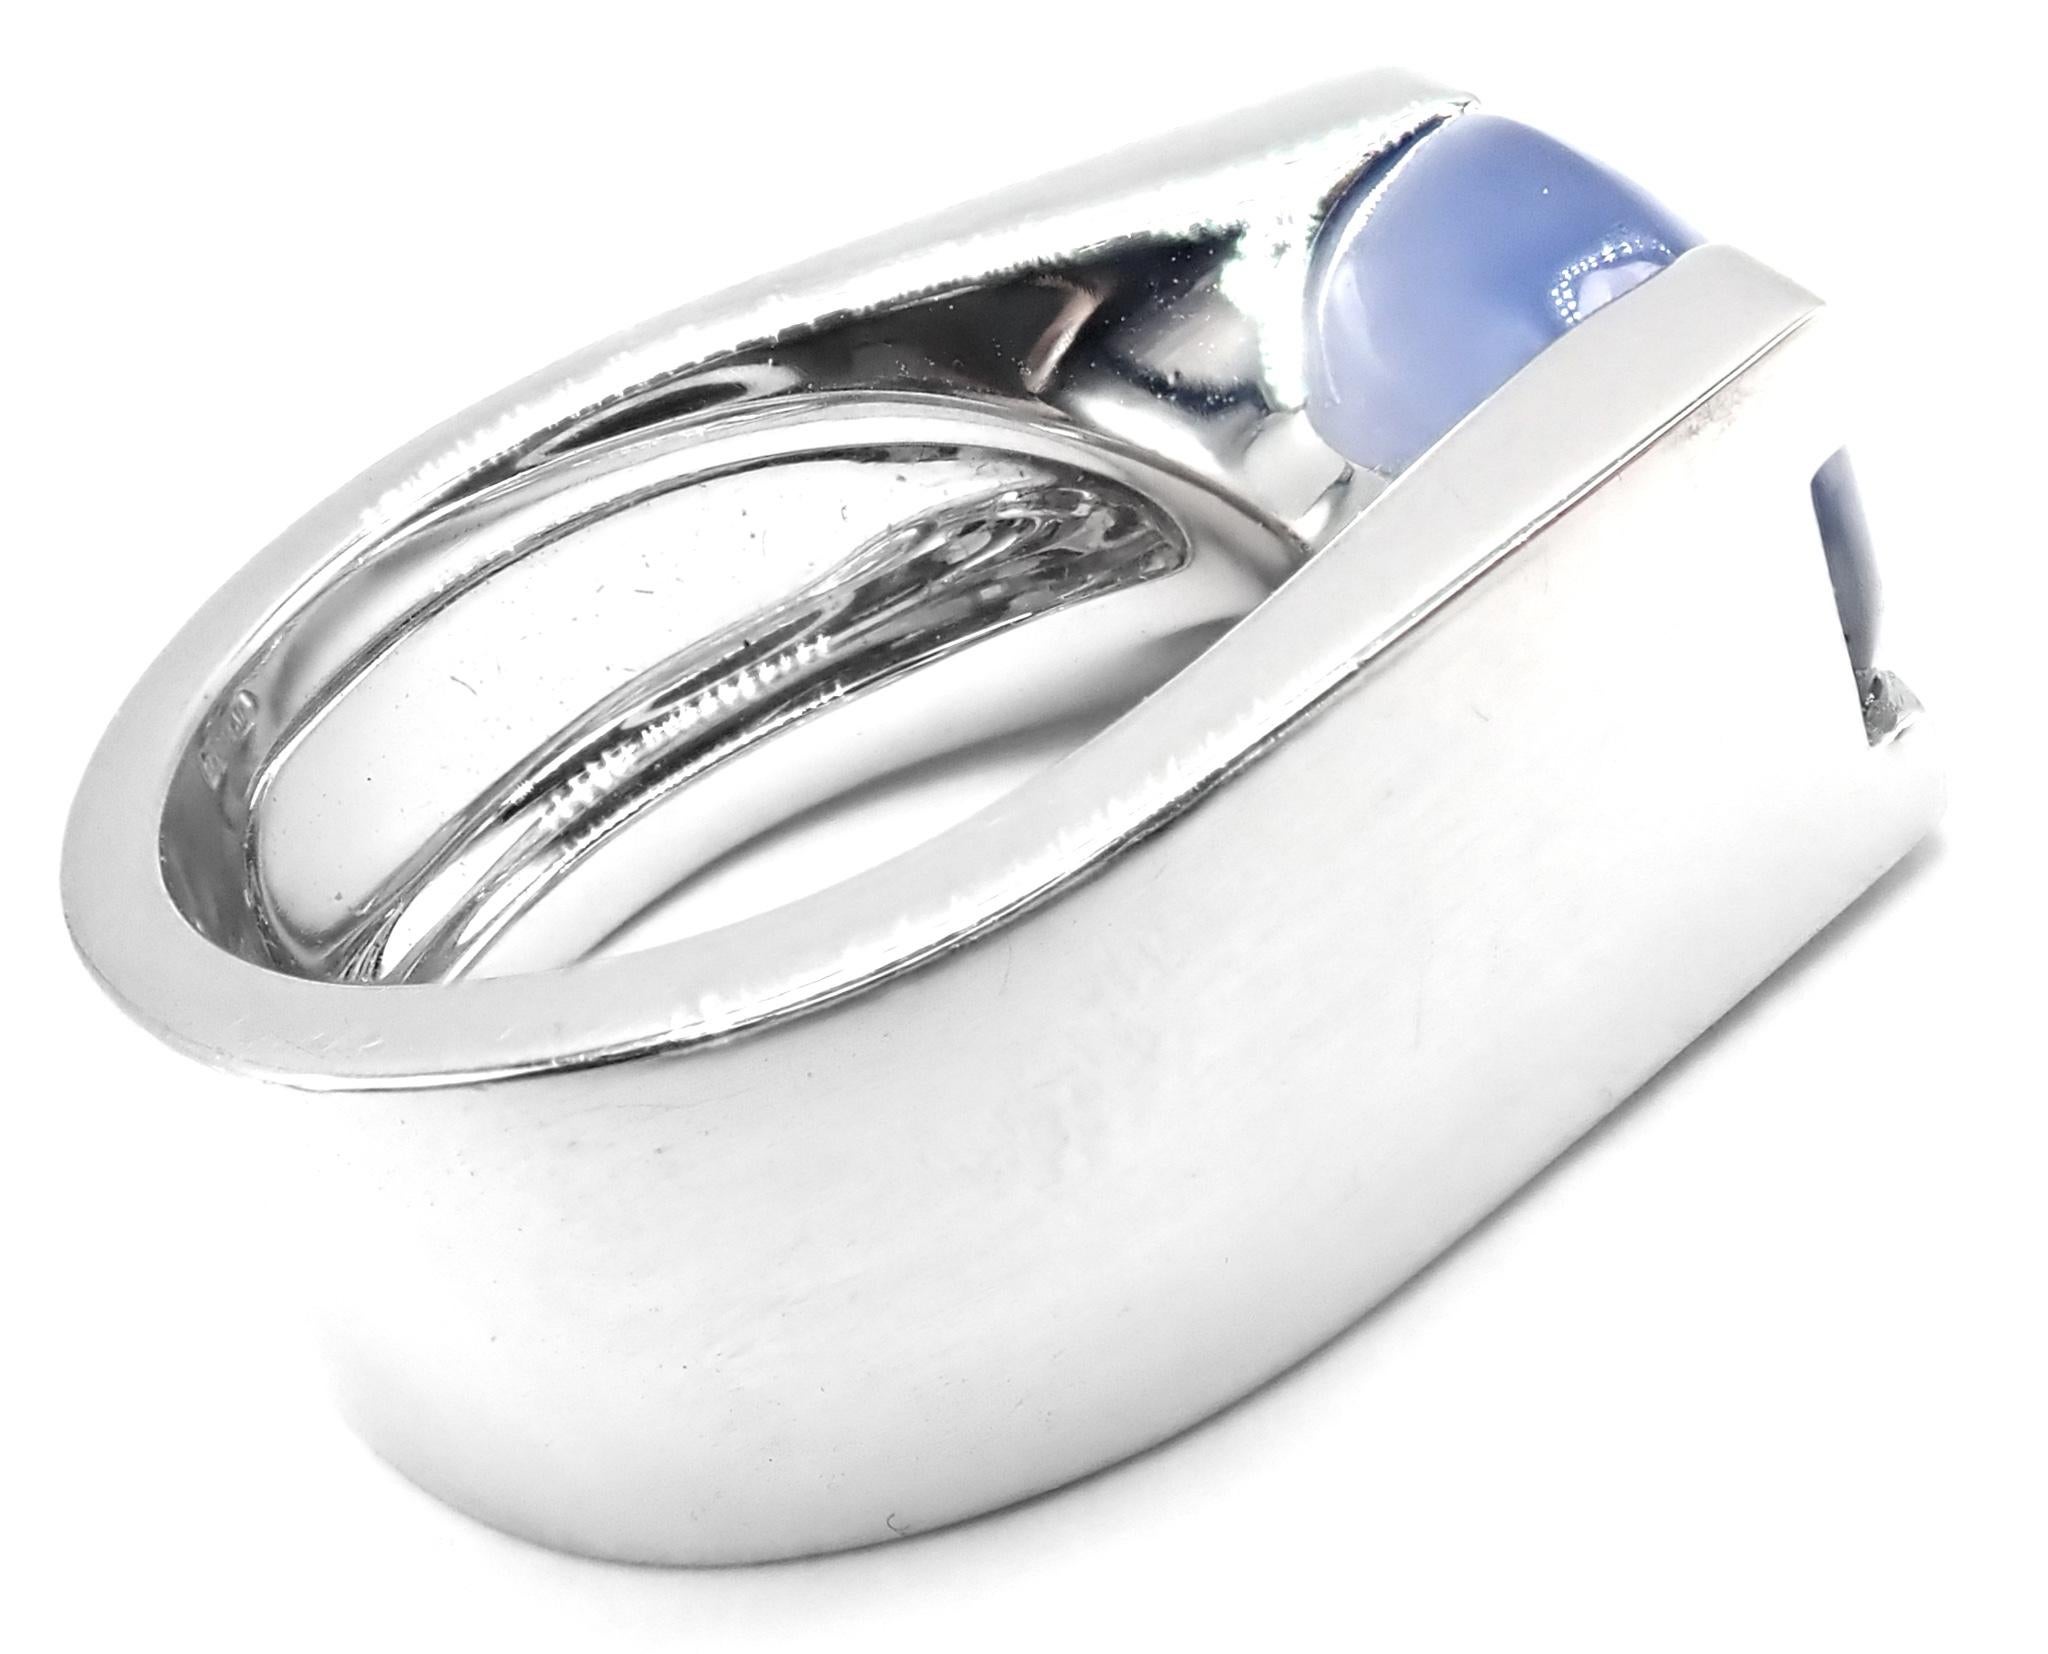 18k White Gold Large Chalcedony Ring by Cartier. 
With 1 oval chalcedony 15 x 10 mm.
This ring comes with service paper from Cartier store and a Cartier store.
Details: 
Ring Size: 6 US or 52 (European)
Weight: 20.9 grams
Stamped Hallmarks: Cartier